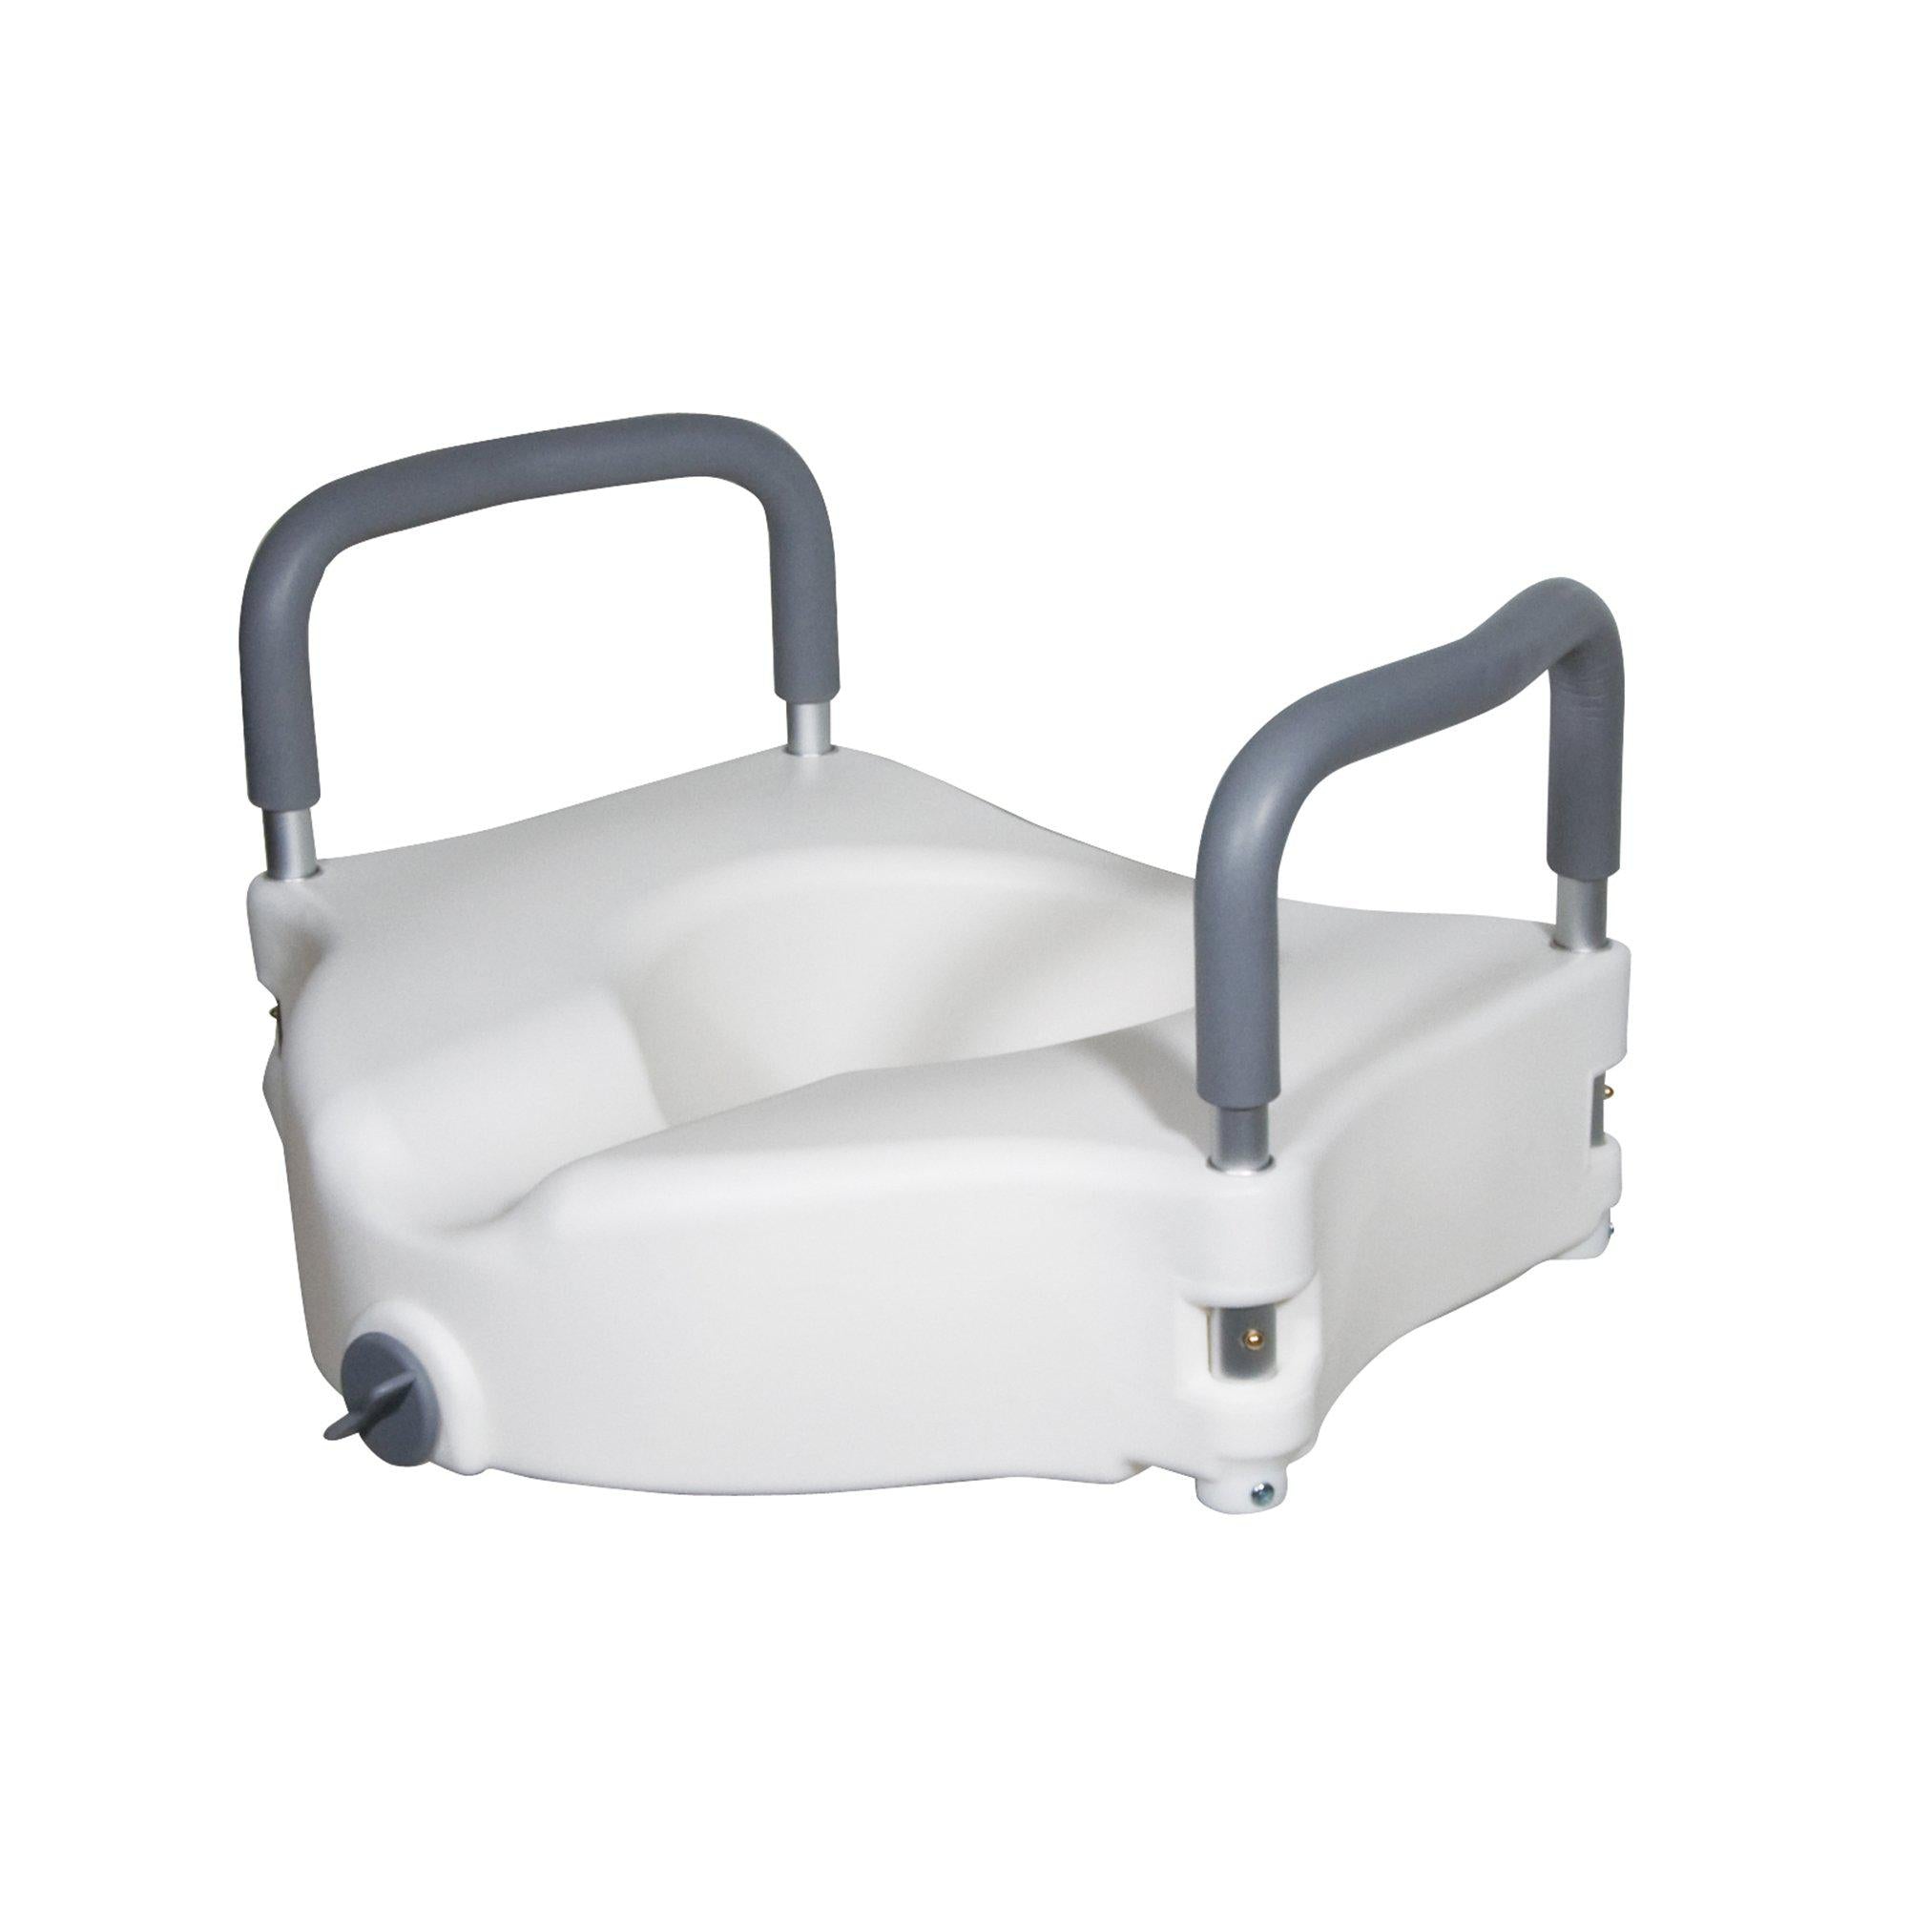 4" Raised Toilet Seat with Removable Arms (Universal)